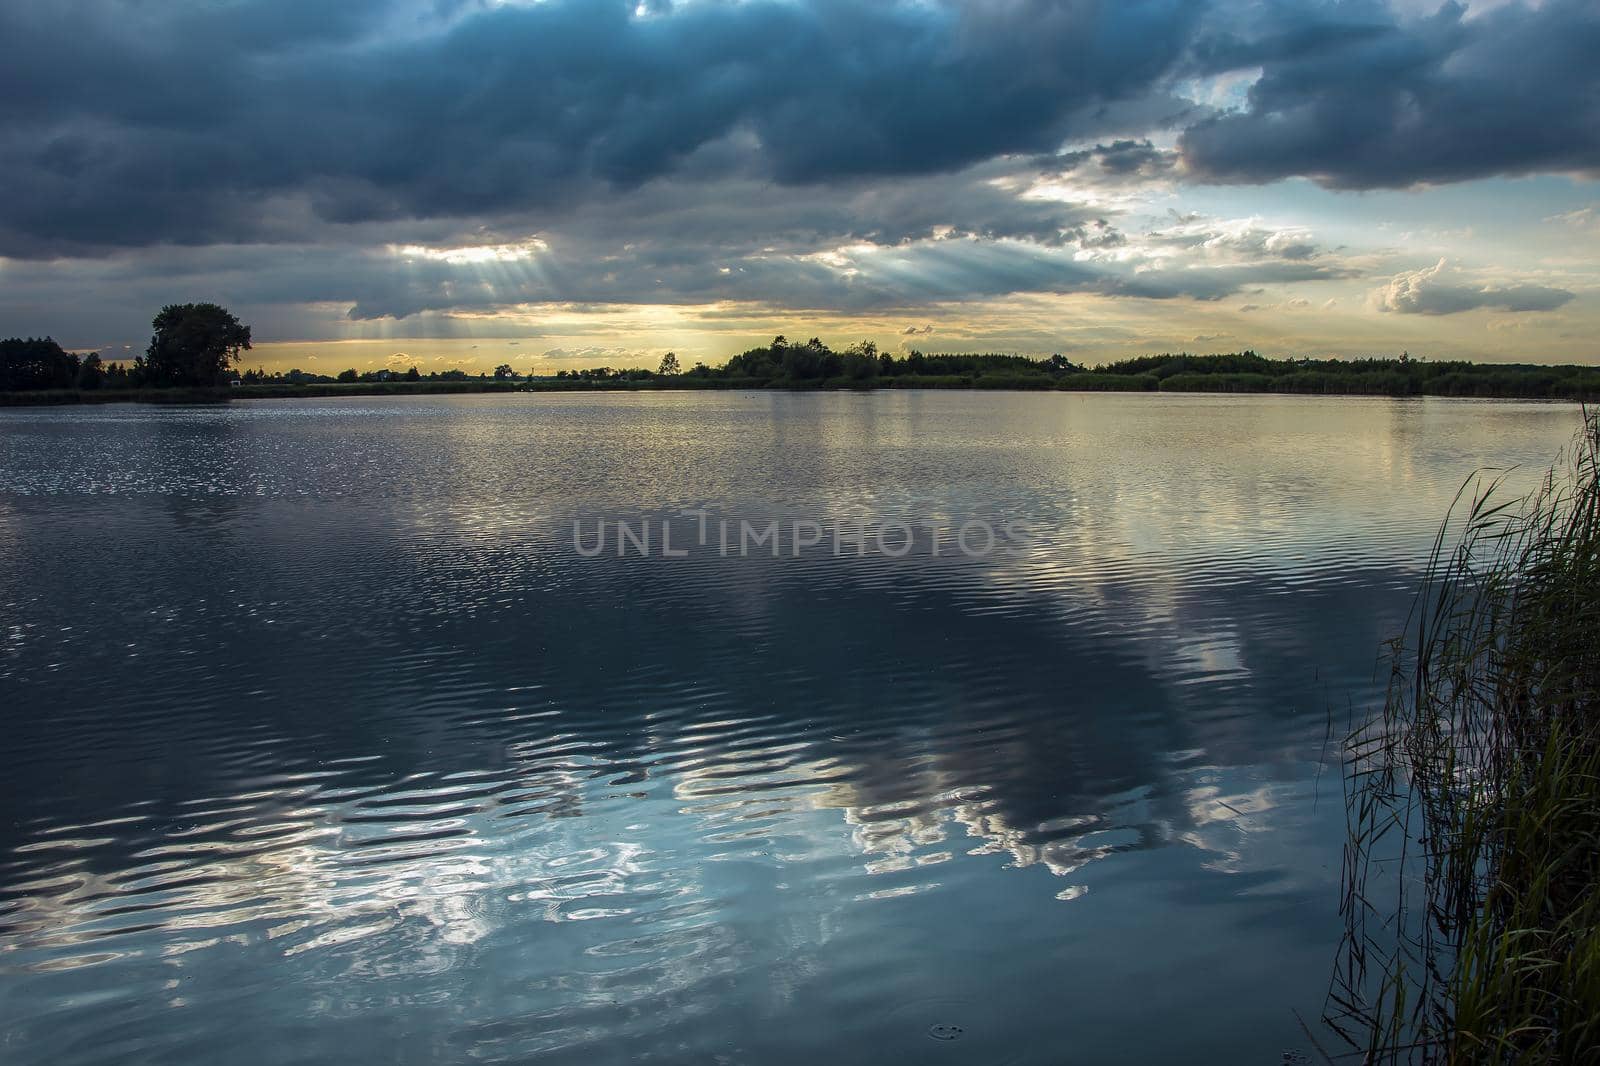 The sun's rays in the clouds over a calm lake, summer view